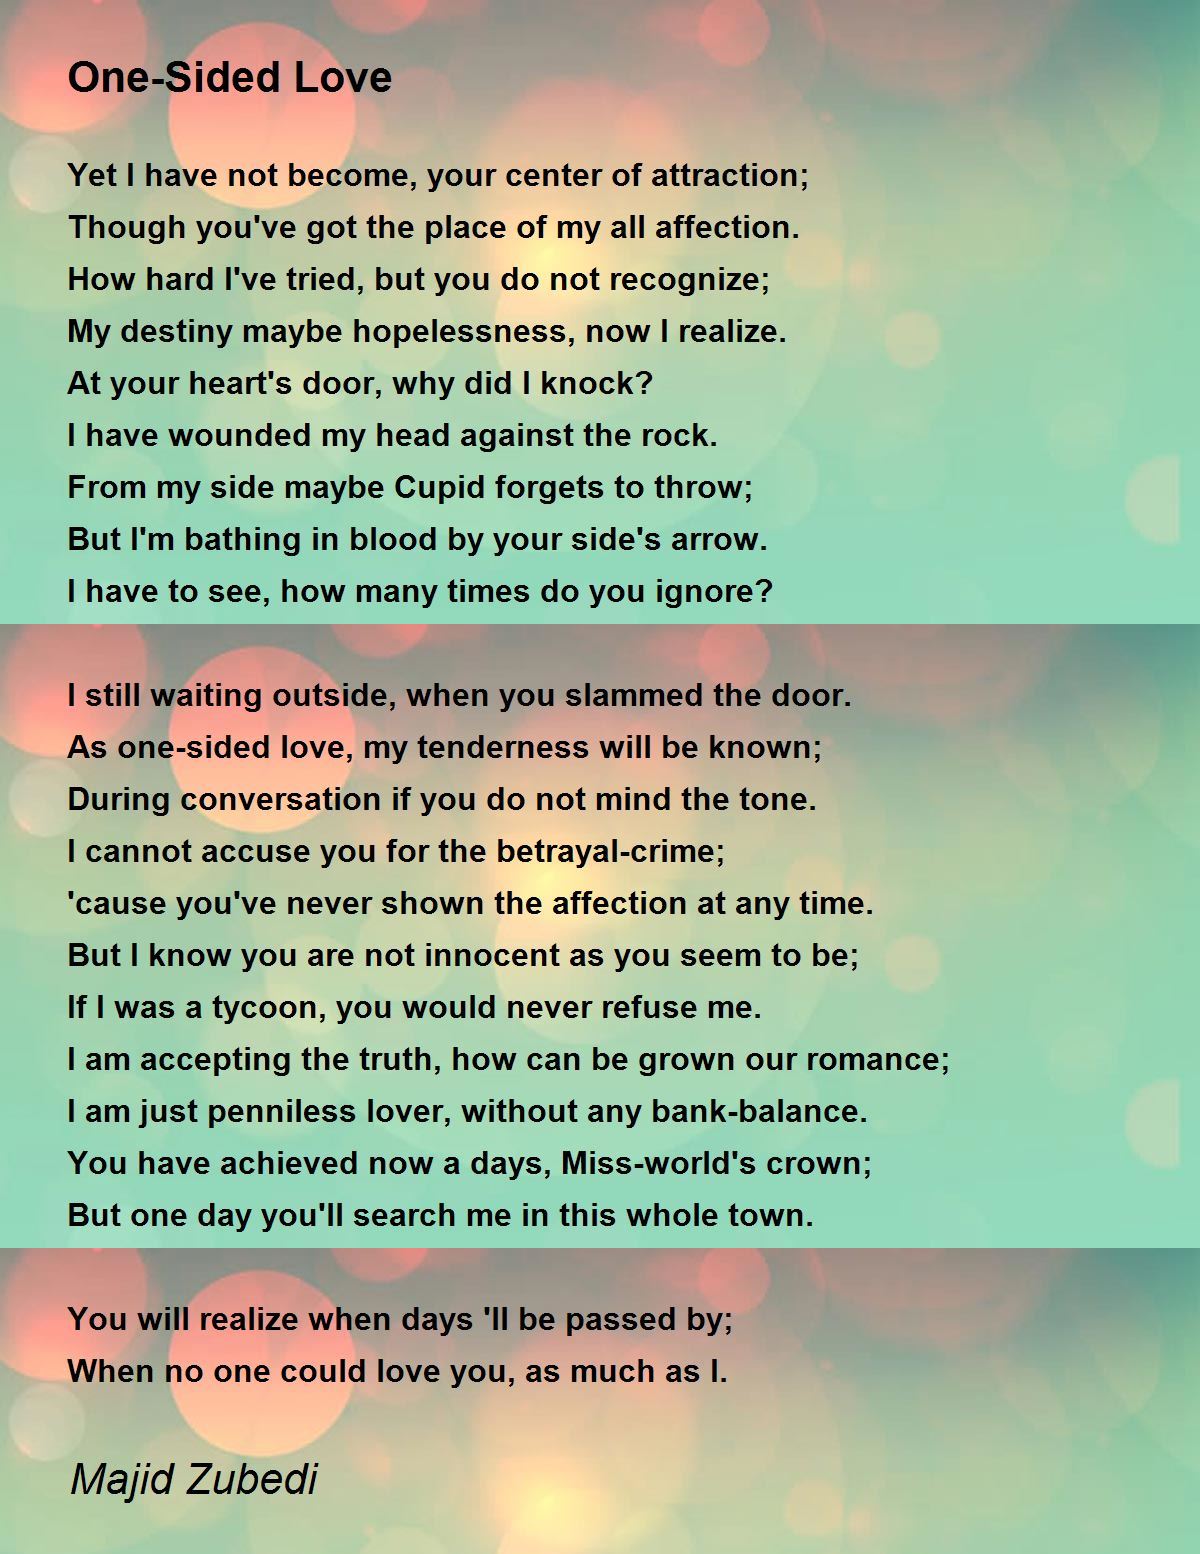 One-Sided Love - One-Sided Love Poem by Majid Zubedi